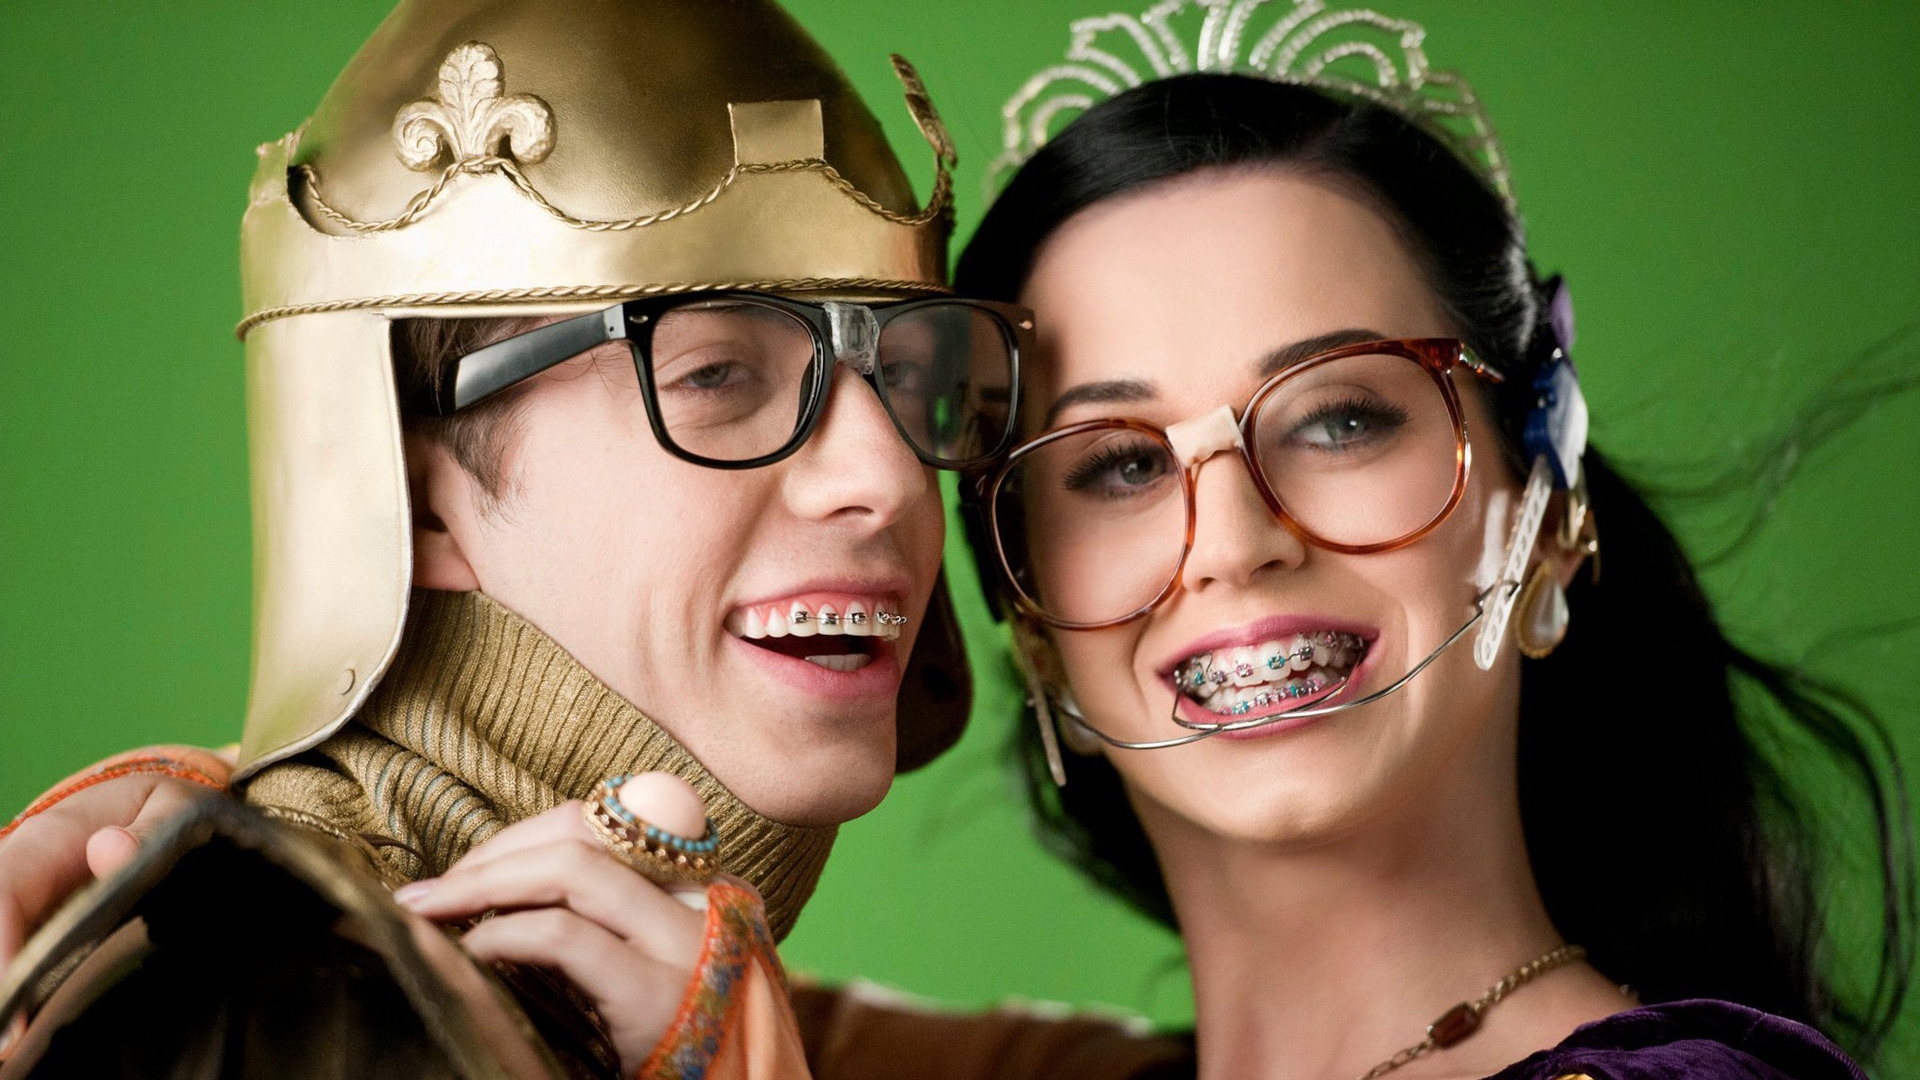 Really Funny Katy Perry for 1920 x 1080 HDTV 1080p resolution